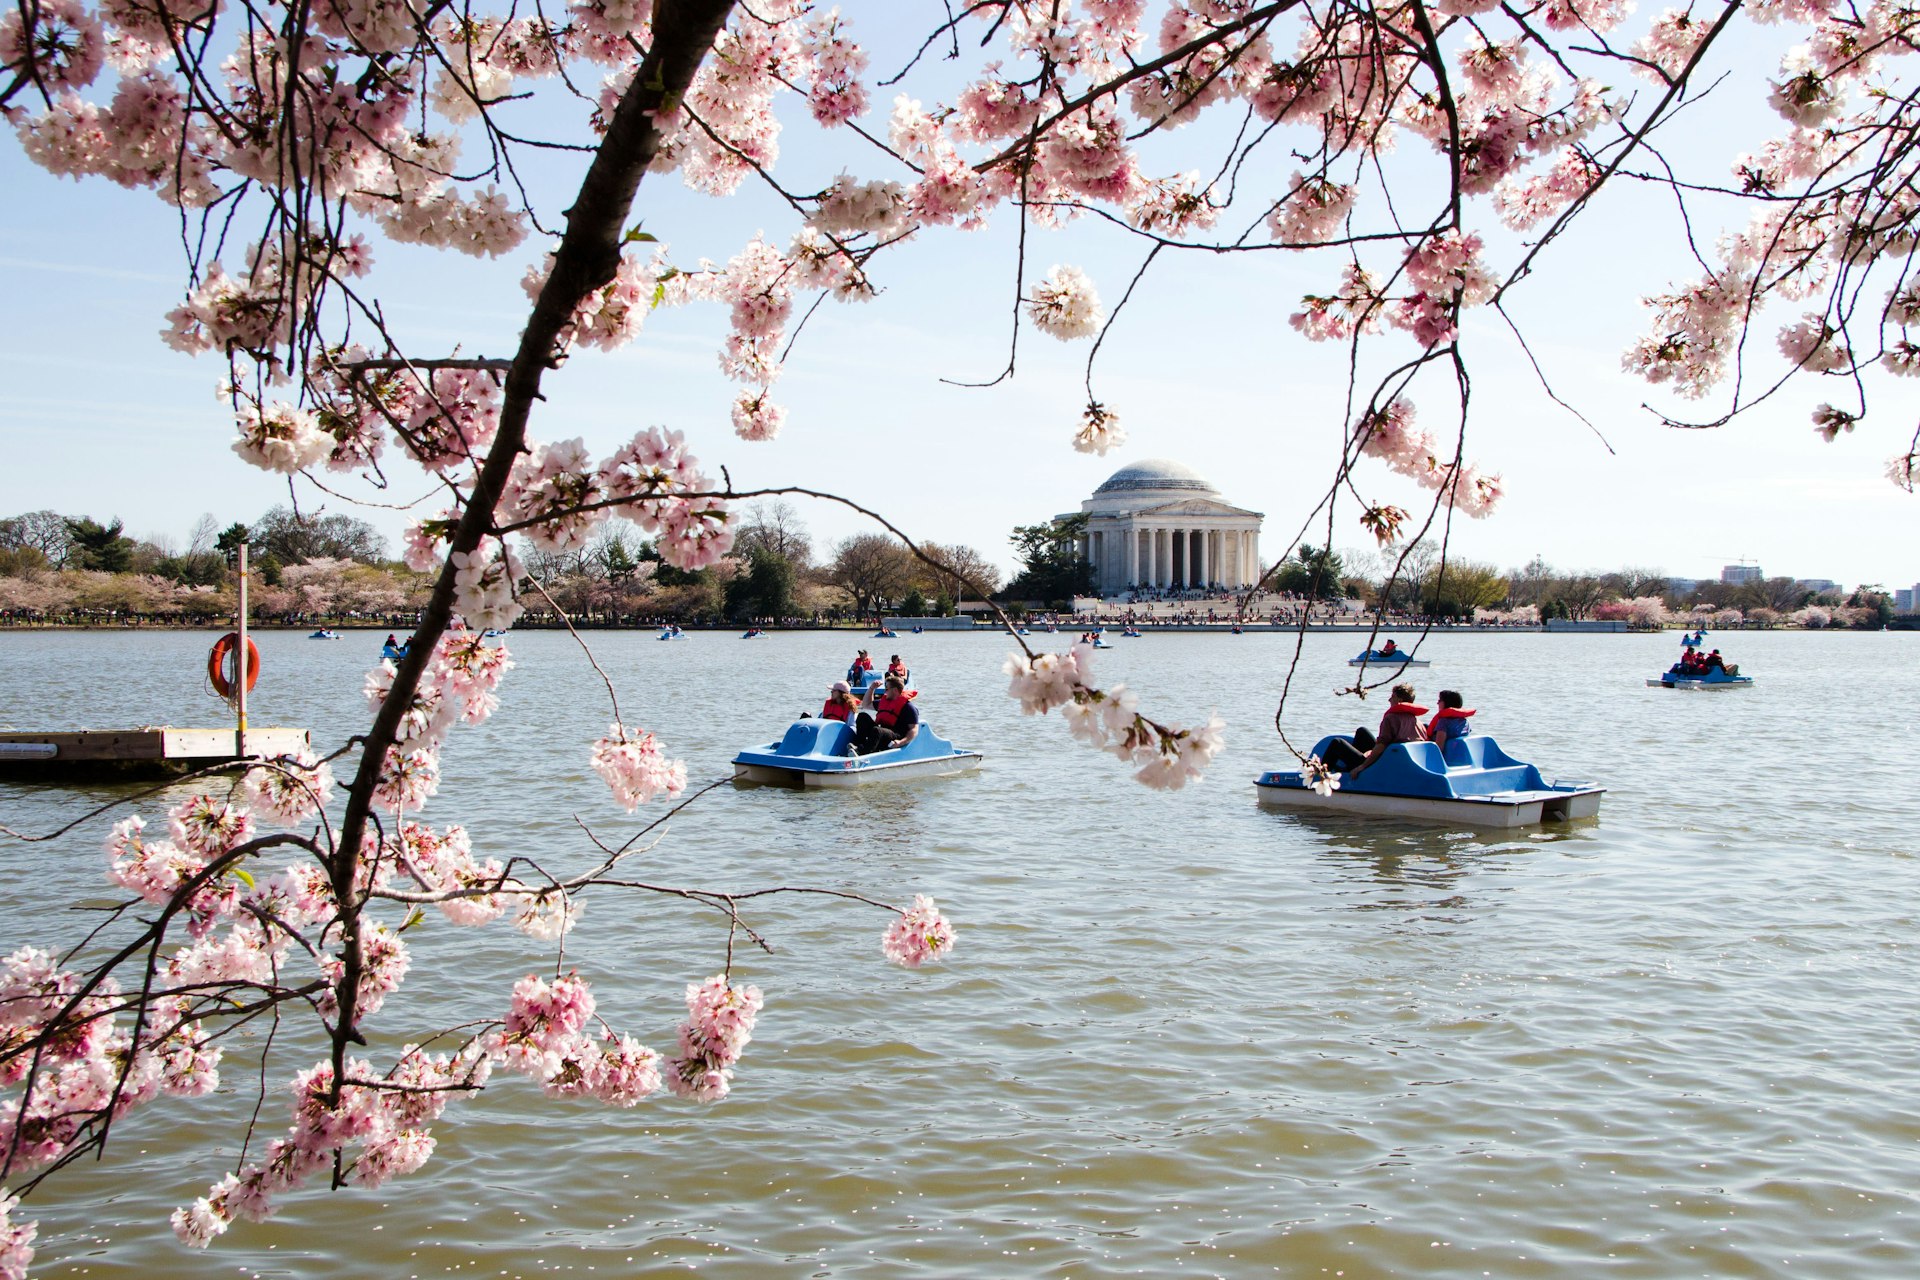 Paddle boats in the Tidal Basin at Washington D. C. with cherry blossoms.